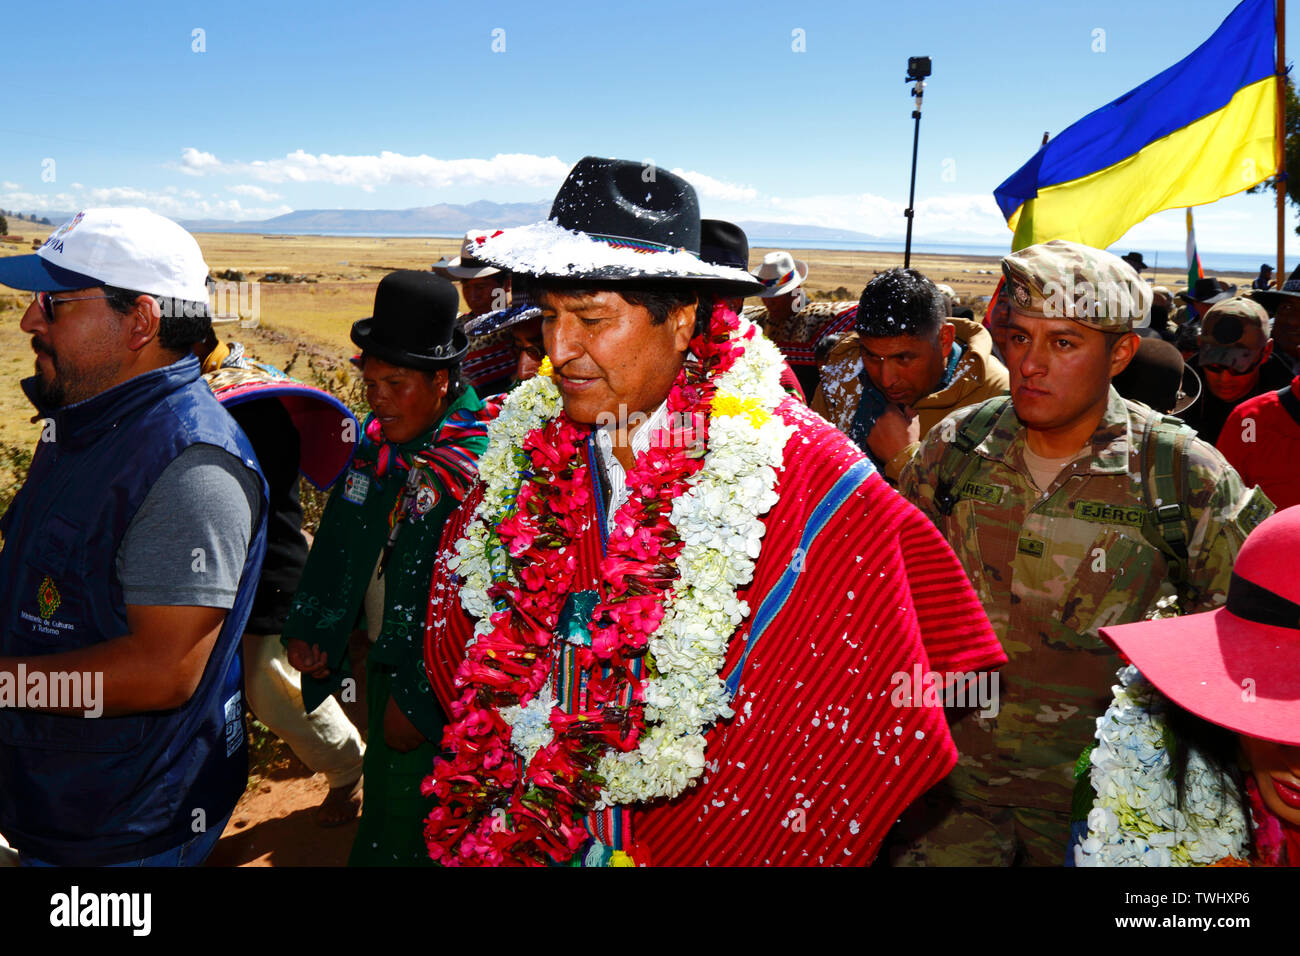 Bolivia 20th June 2019: Bolivian president Evo Morales Ayma (centre) leads an International Hike along a section of the Qhapaq Ñan Inca road from Azafranal near Lake Titicaca (which is visible in the background). The event was organised by the Ministry of Cultures & Tourism to promote tourism and Bolivia's indigenous cultures. Stock Photo